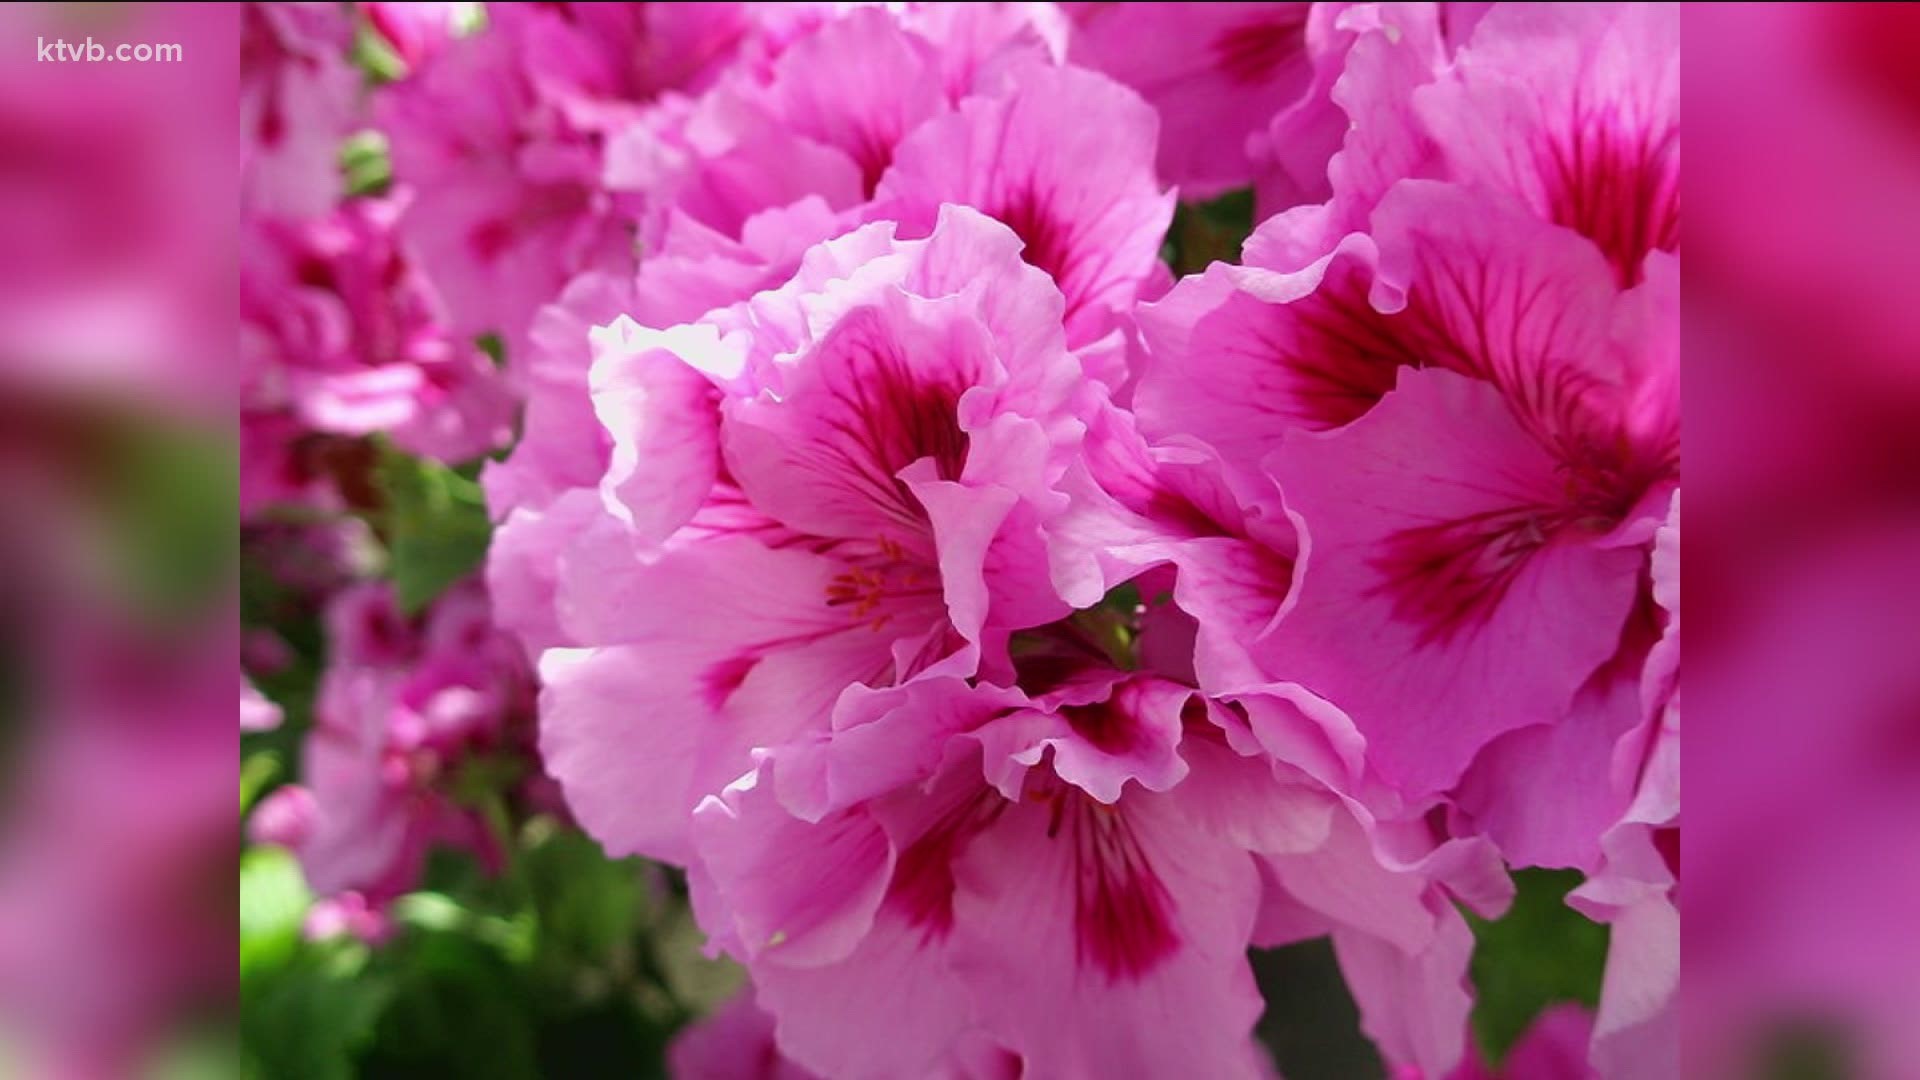 Garden master Jim Duthie tells us about geraniums with some helpful tips on how to keep them looking good.